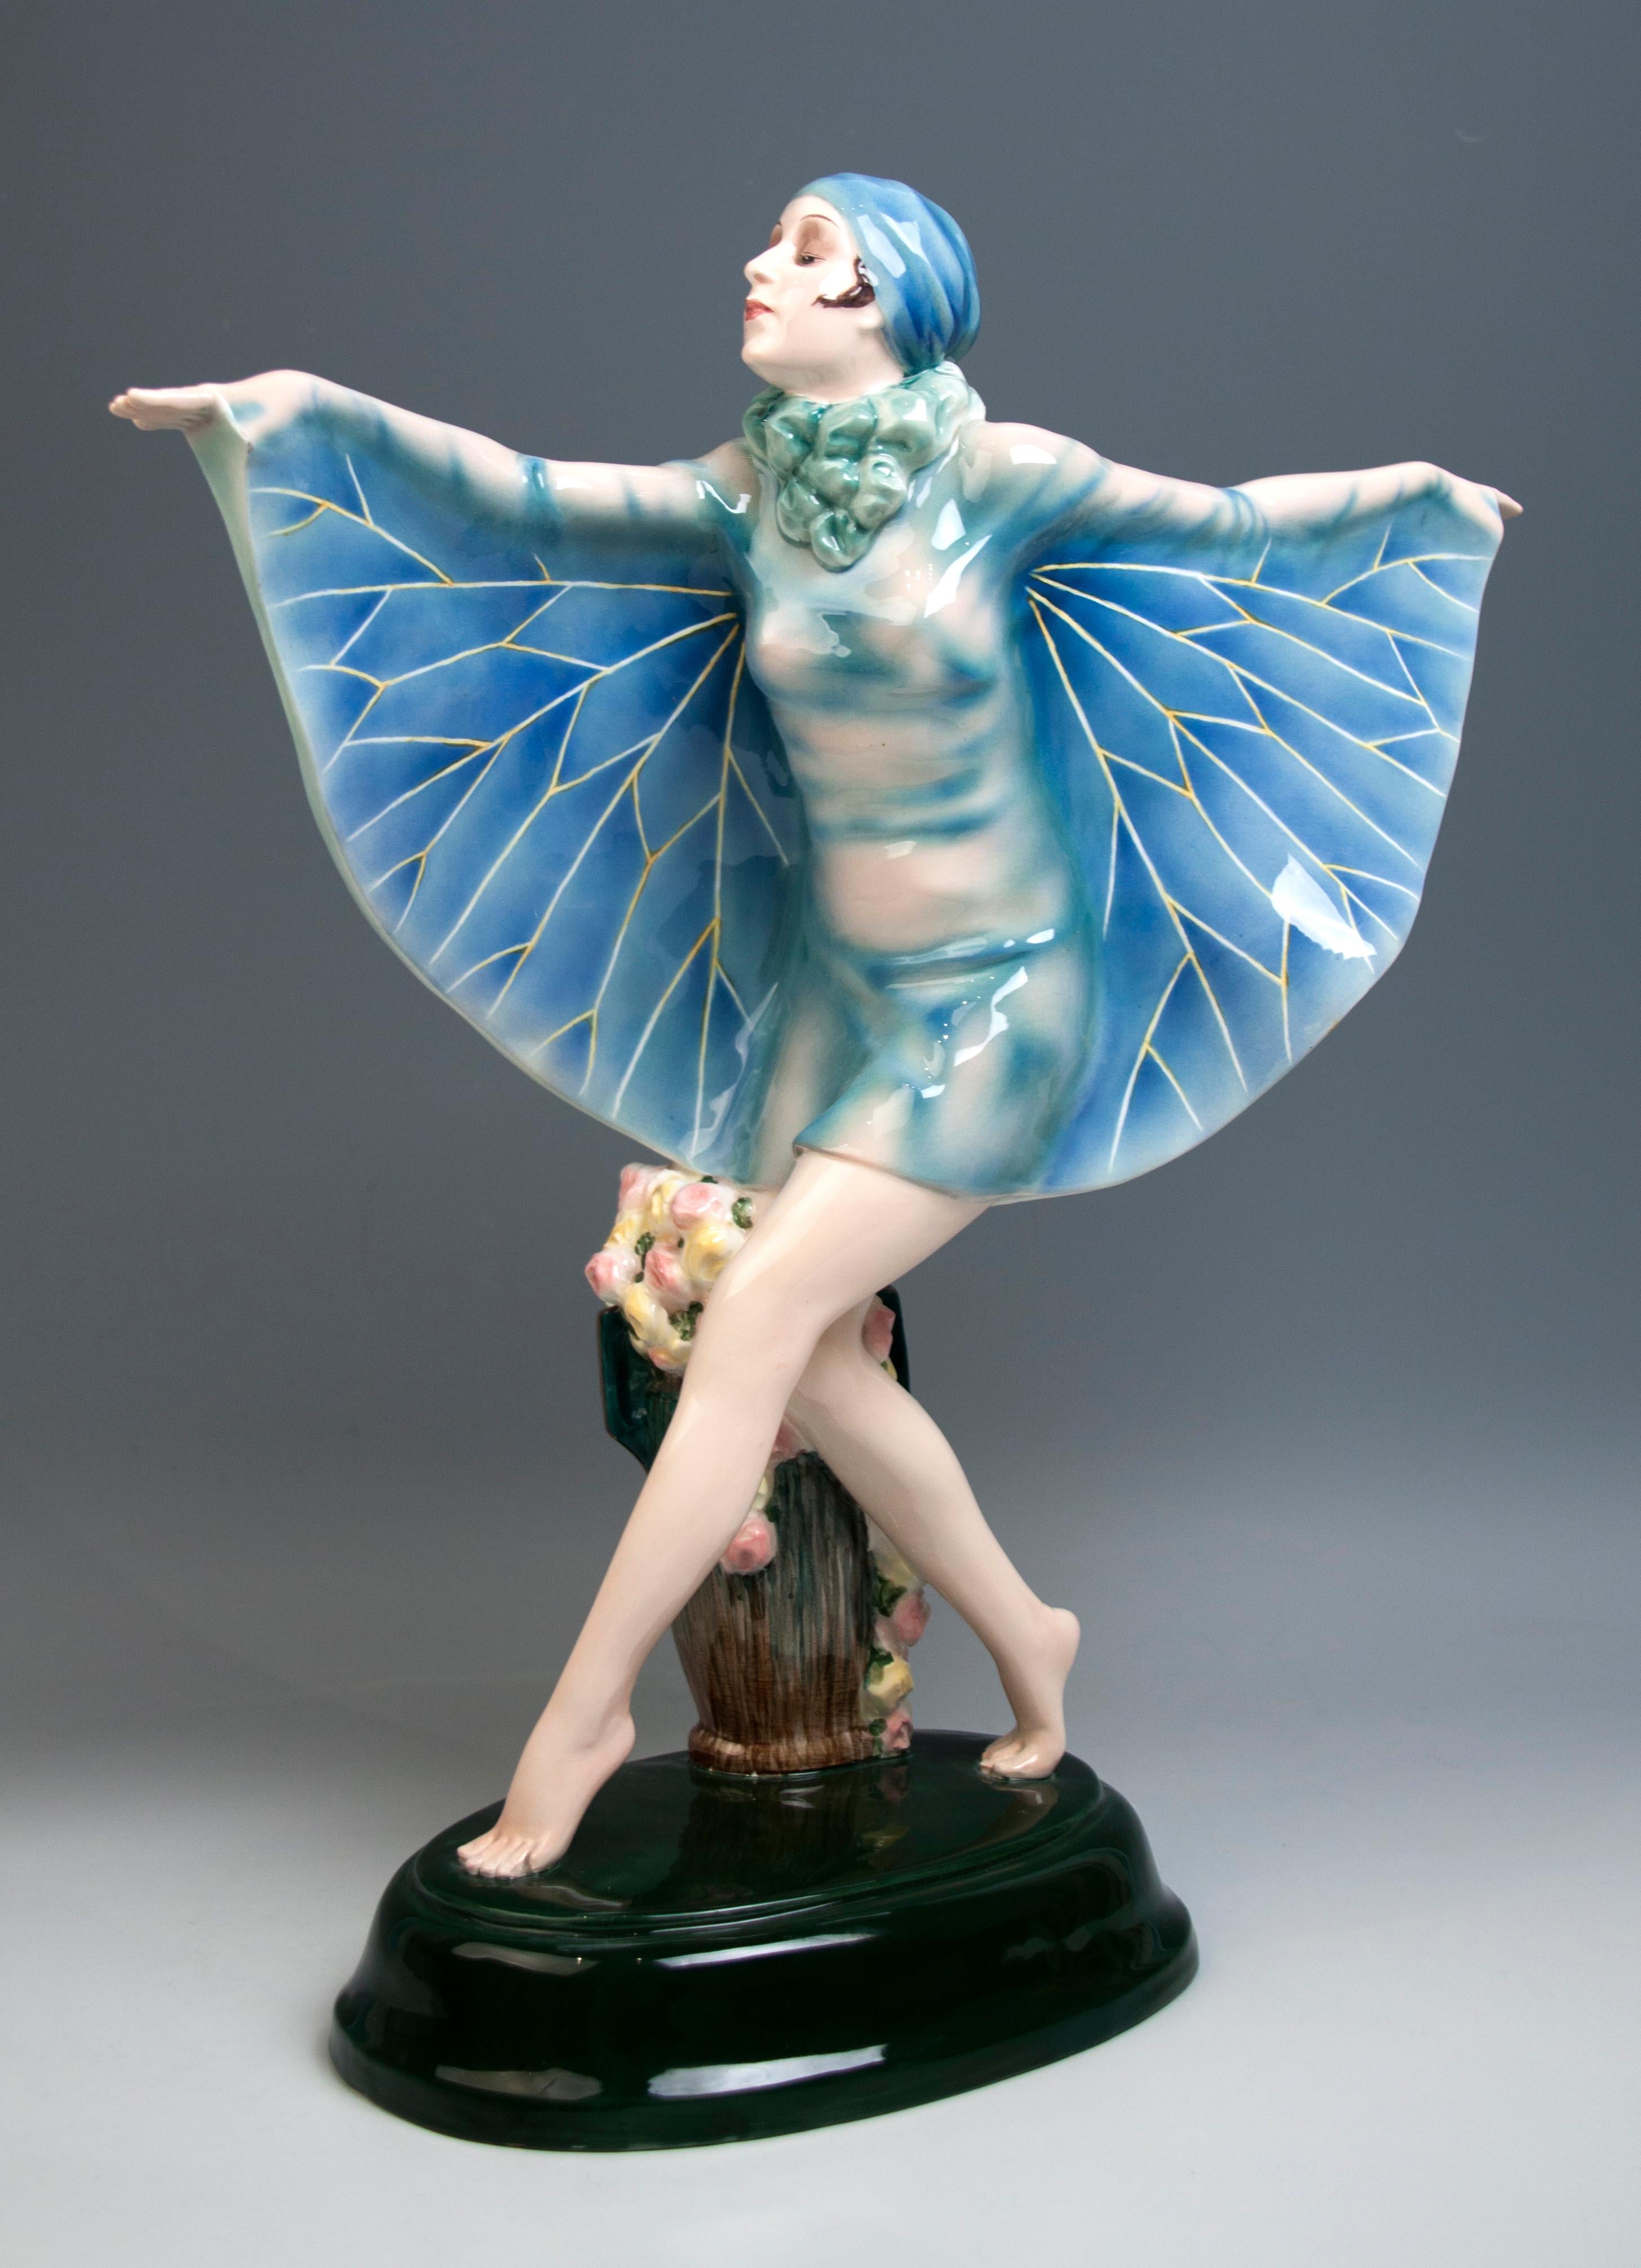 Exceptional large and elegant goldscheider Art Deco Figurine

Designed by Josef Lorenzl(1892-1950), one of the most important designers having been active for Goldscheider manufactory in the period of 1920-1940.
Model 5230 was created in